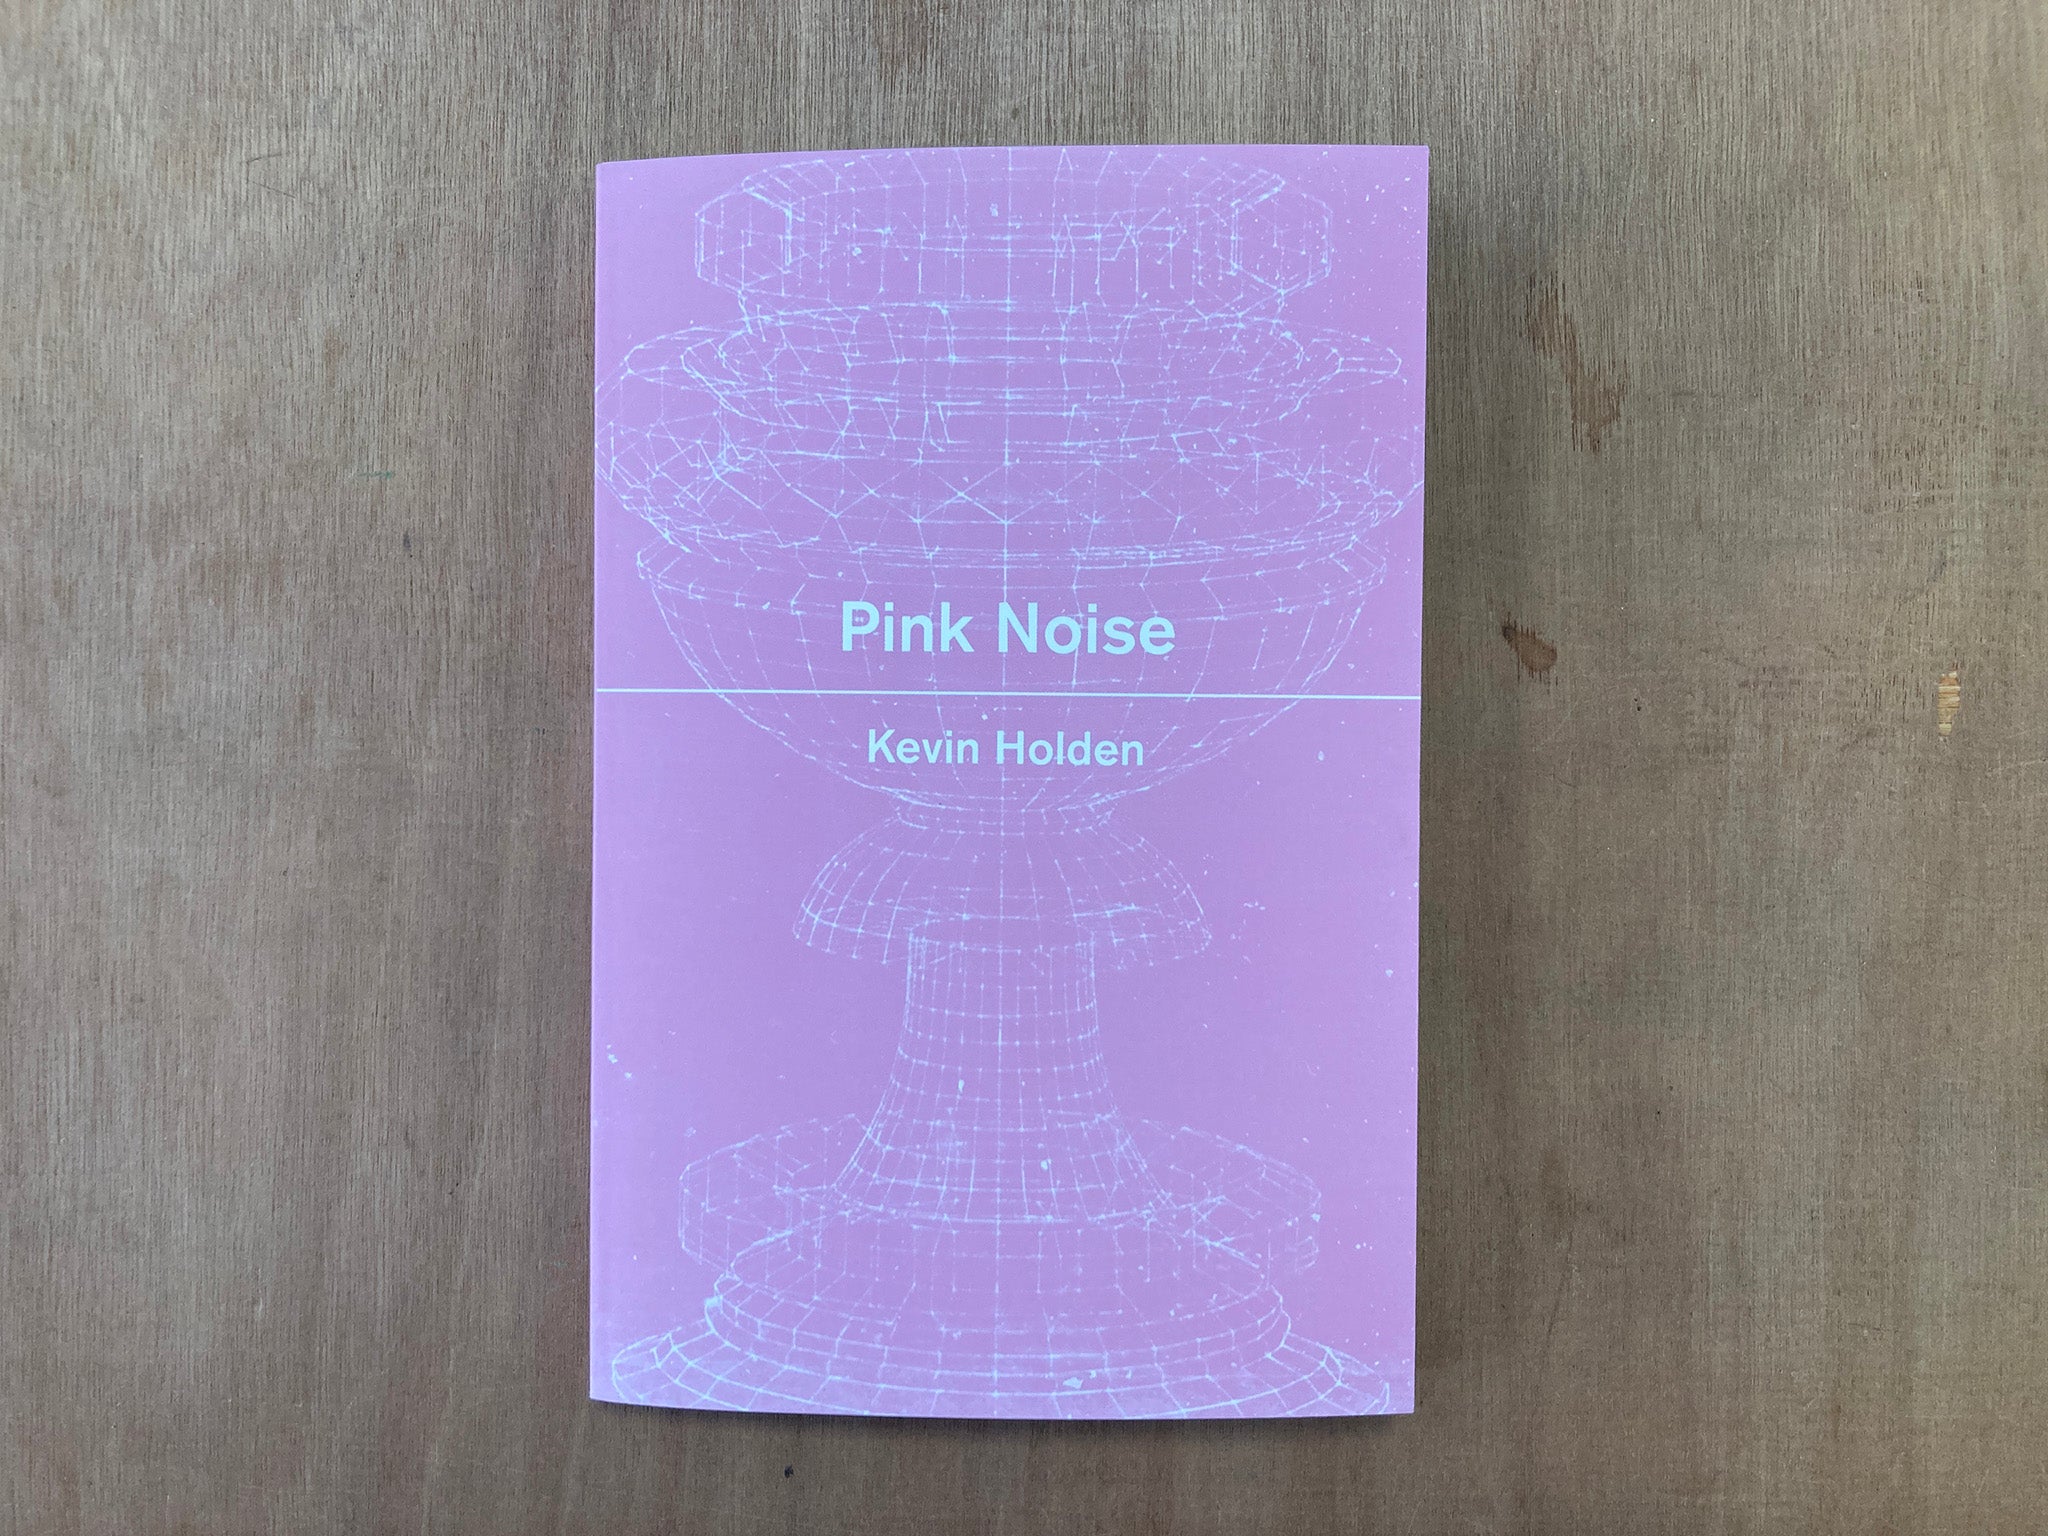 PINK NOISE by Kevin Holden